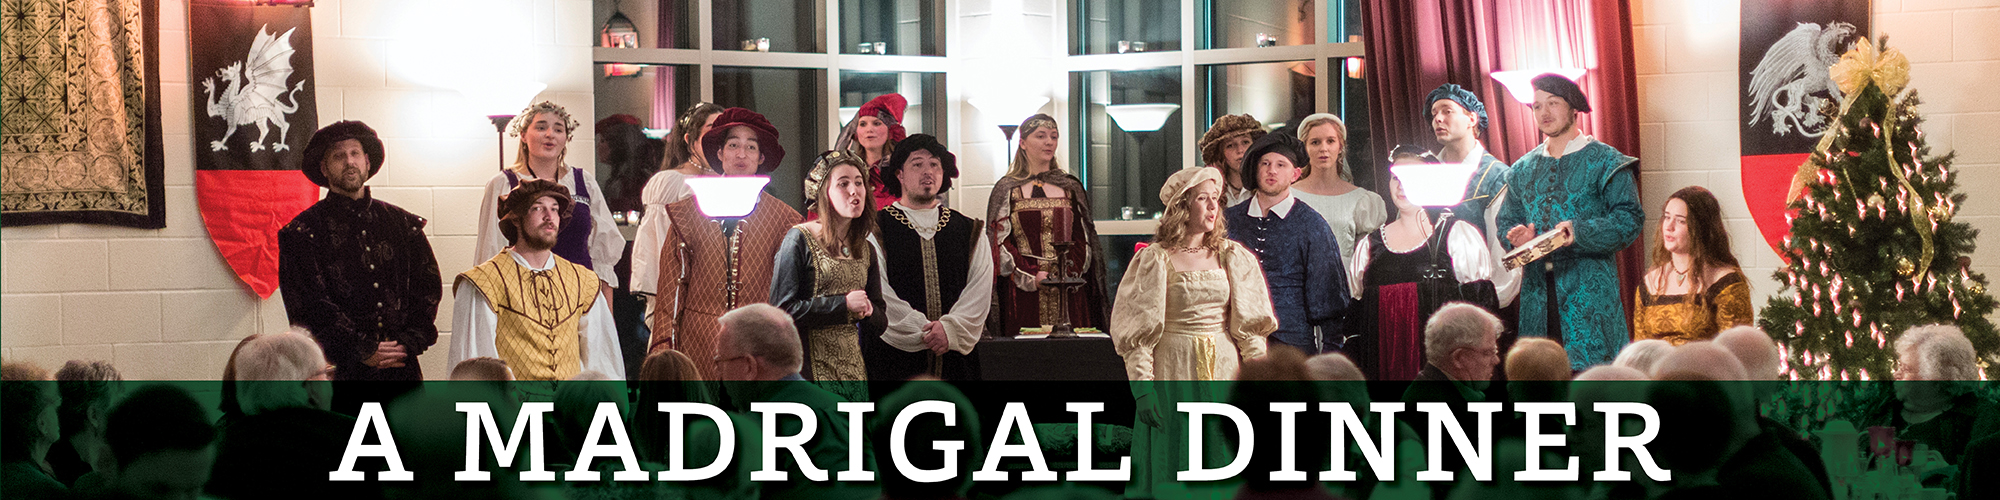 BHSU music students perform in costume for the Madrigal Dinner